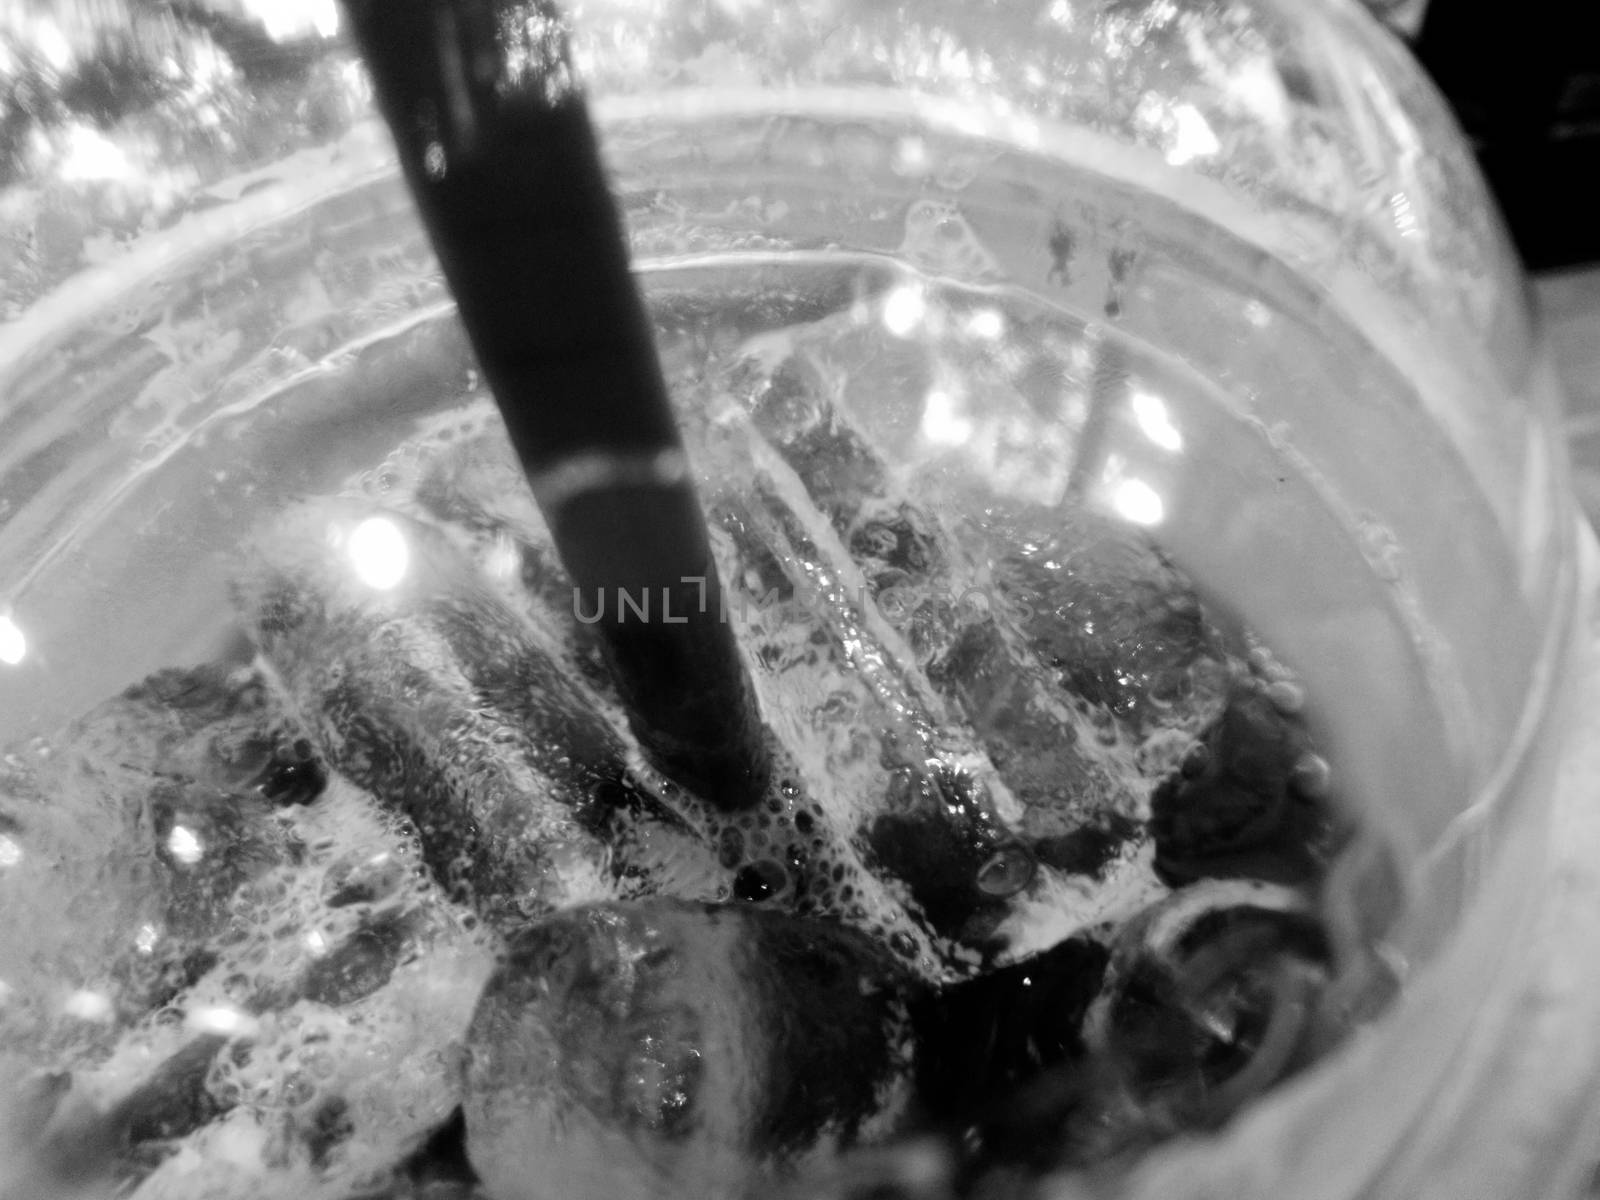 Black Americano iced coffee in black and white by eyeofpaul